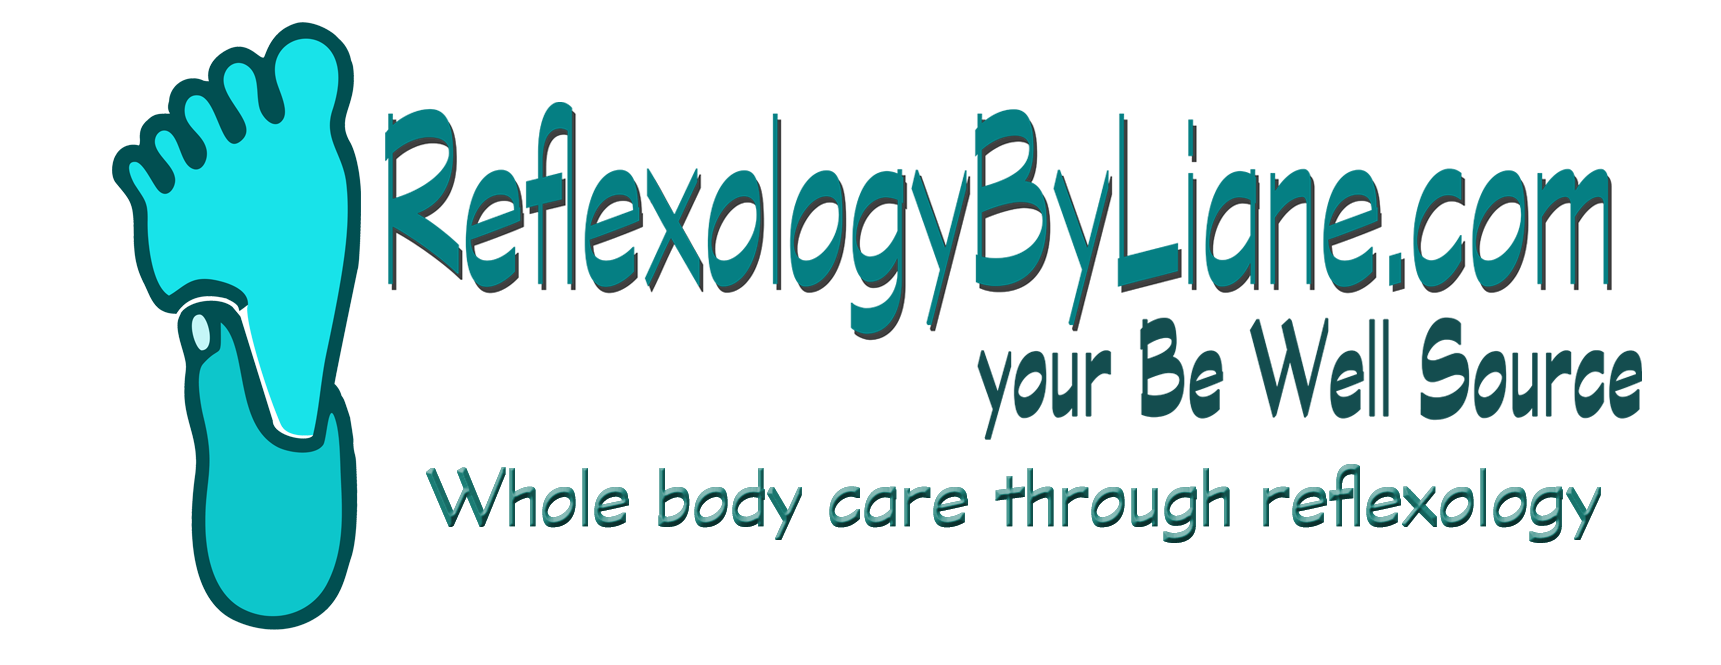 Reflexology by Liane your Be Well Source